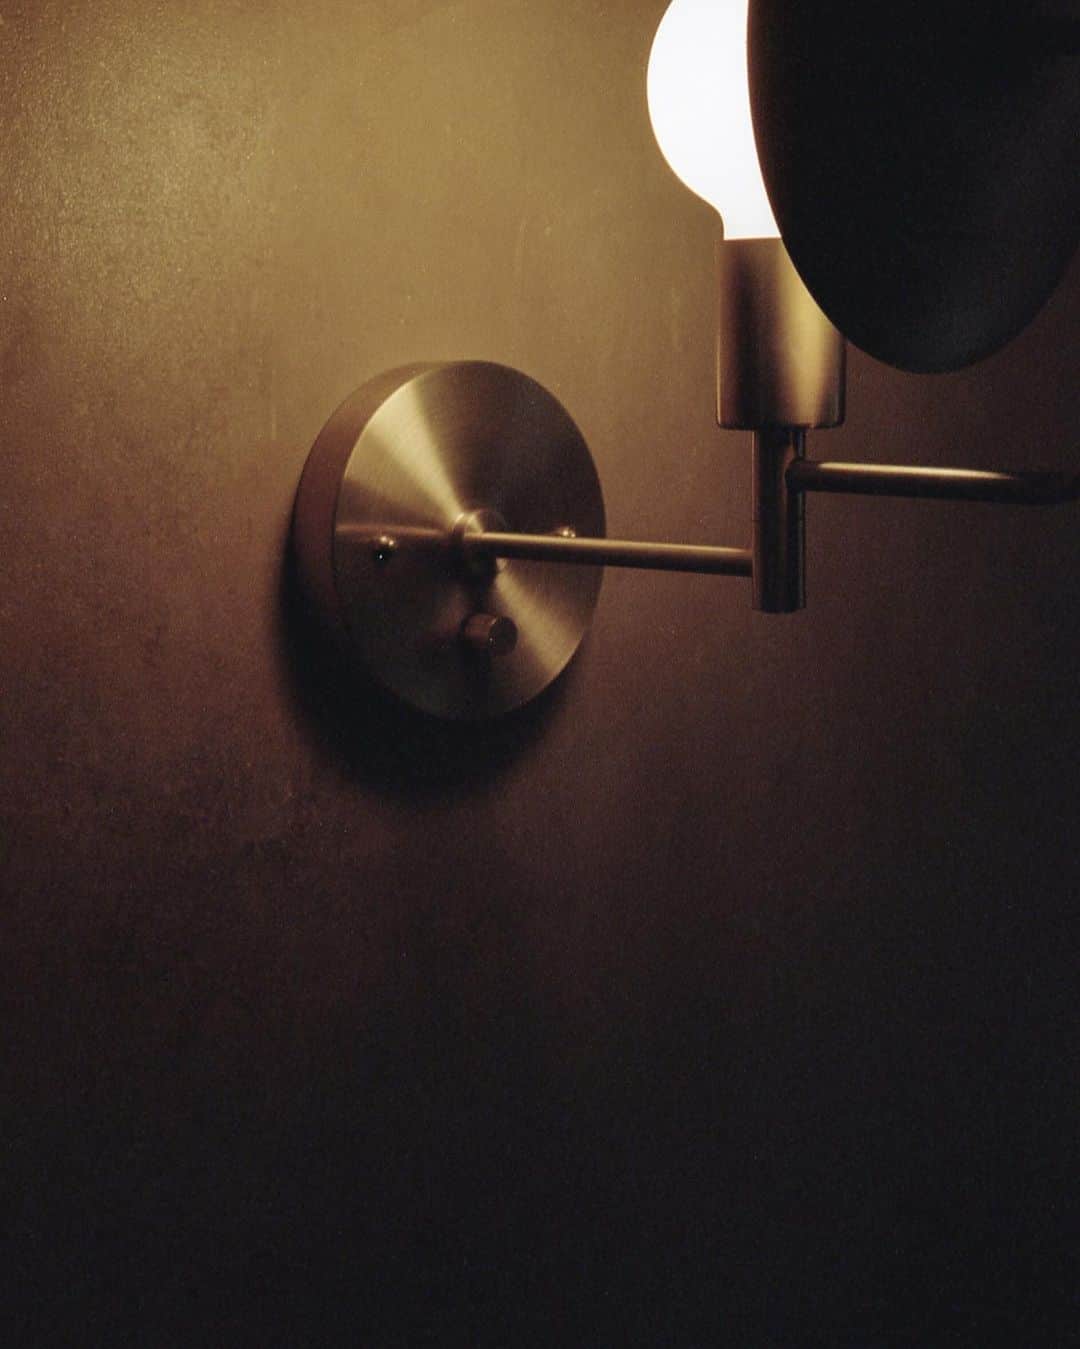 C E R E A Lのインスタグラム：「“a wall sconce illuminates the roughly textured wall from behind its cylindrical brass shade. A Chamber Pendant hangs from the centre of the ceiling, casting its soft glow against pools of shadow that retreat into corners”  Read more at readcereal.com/lights-and-shadow (link in profile)」